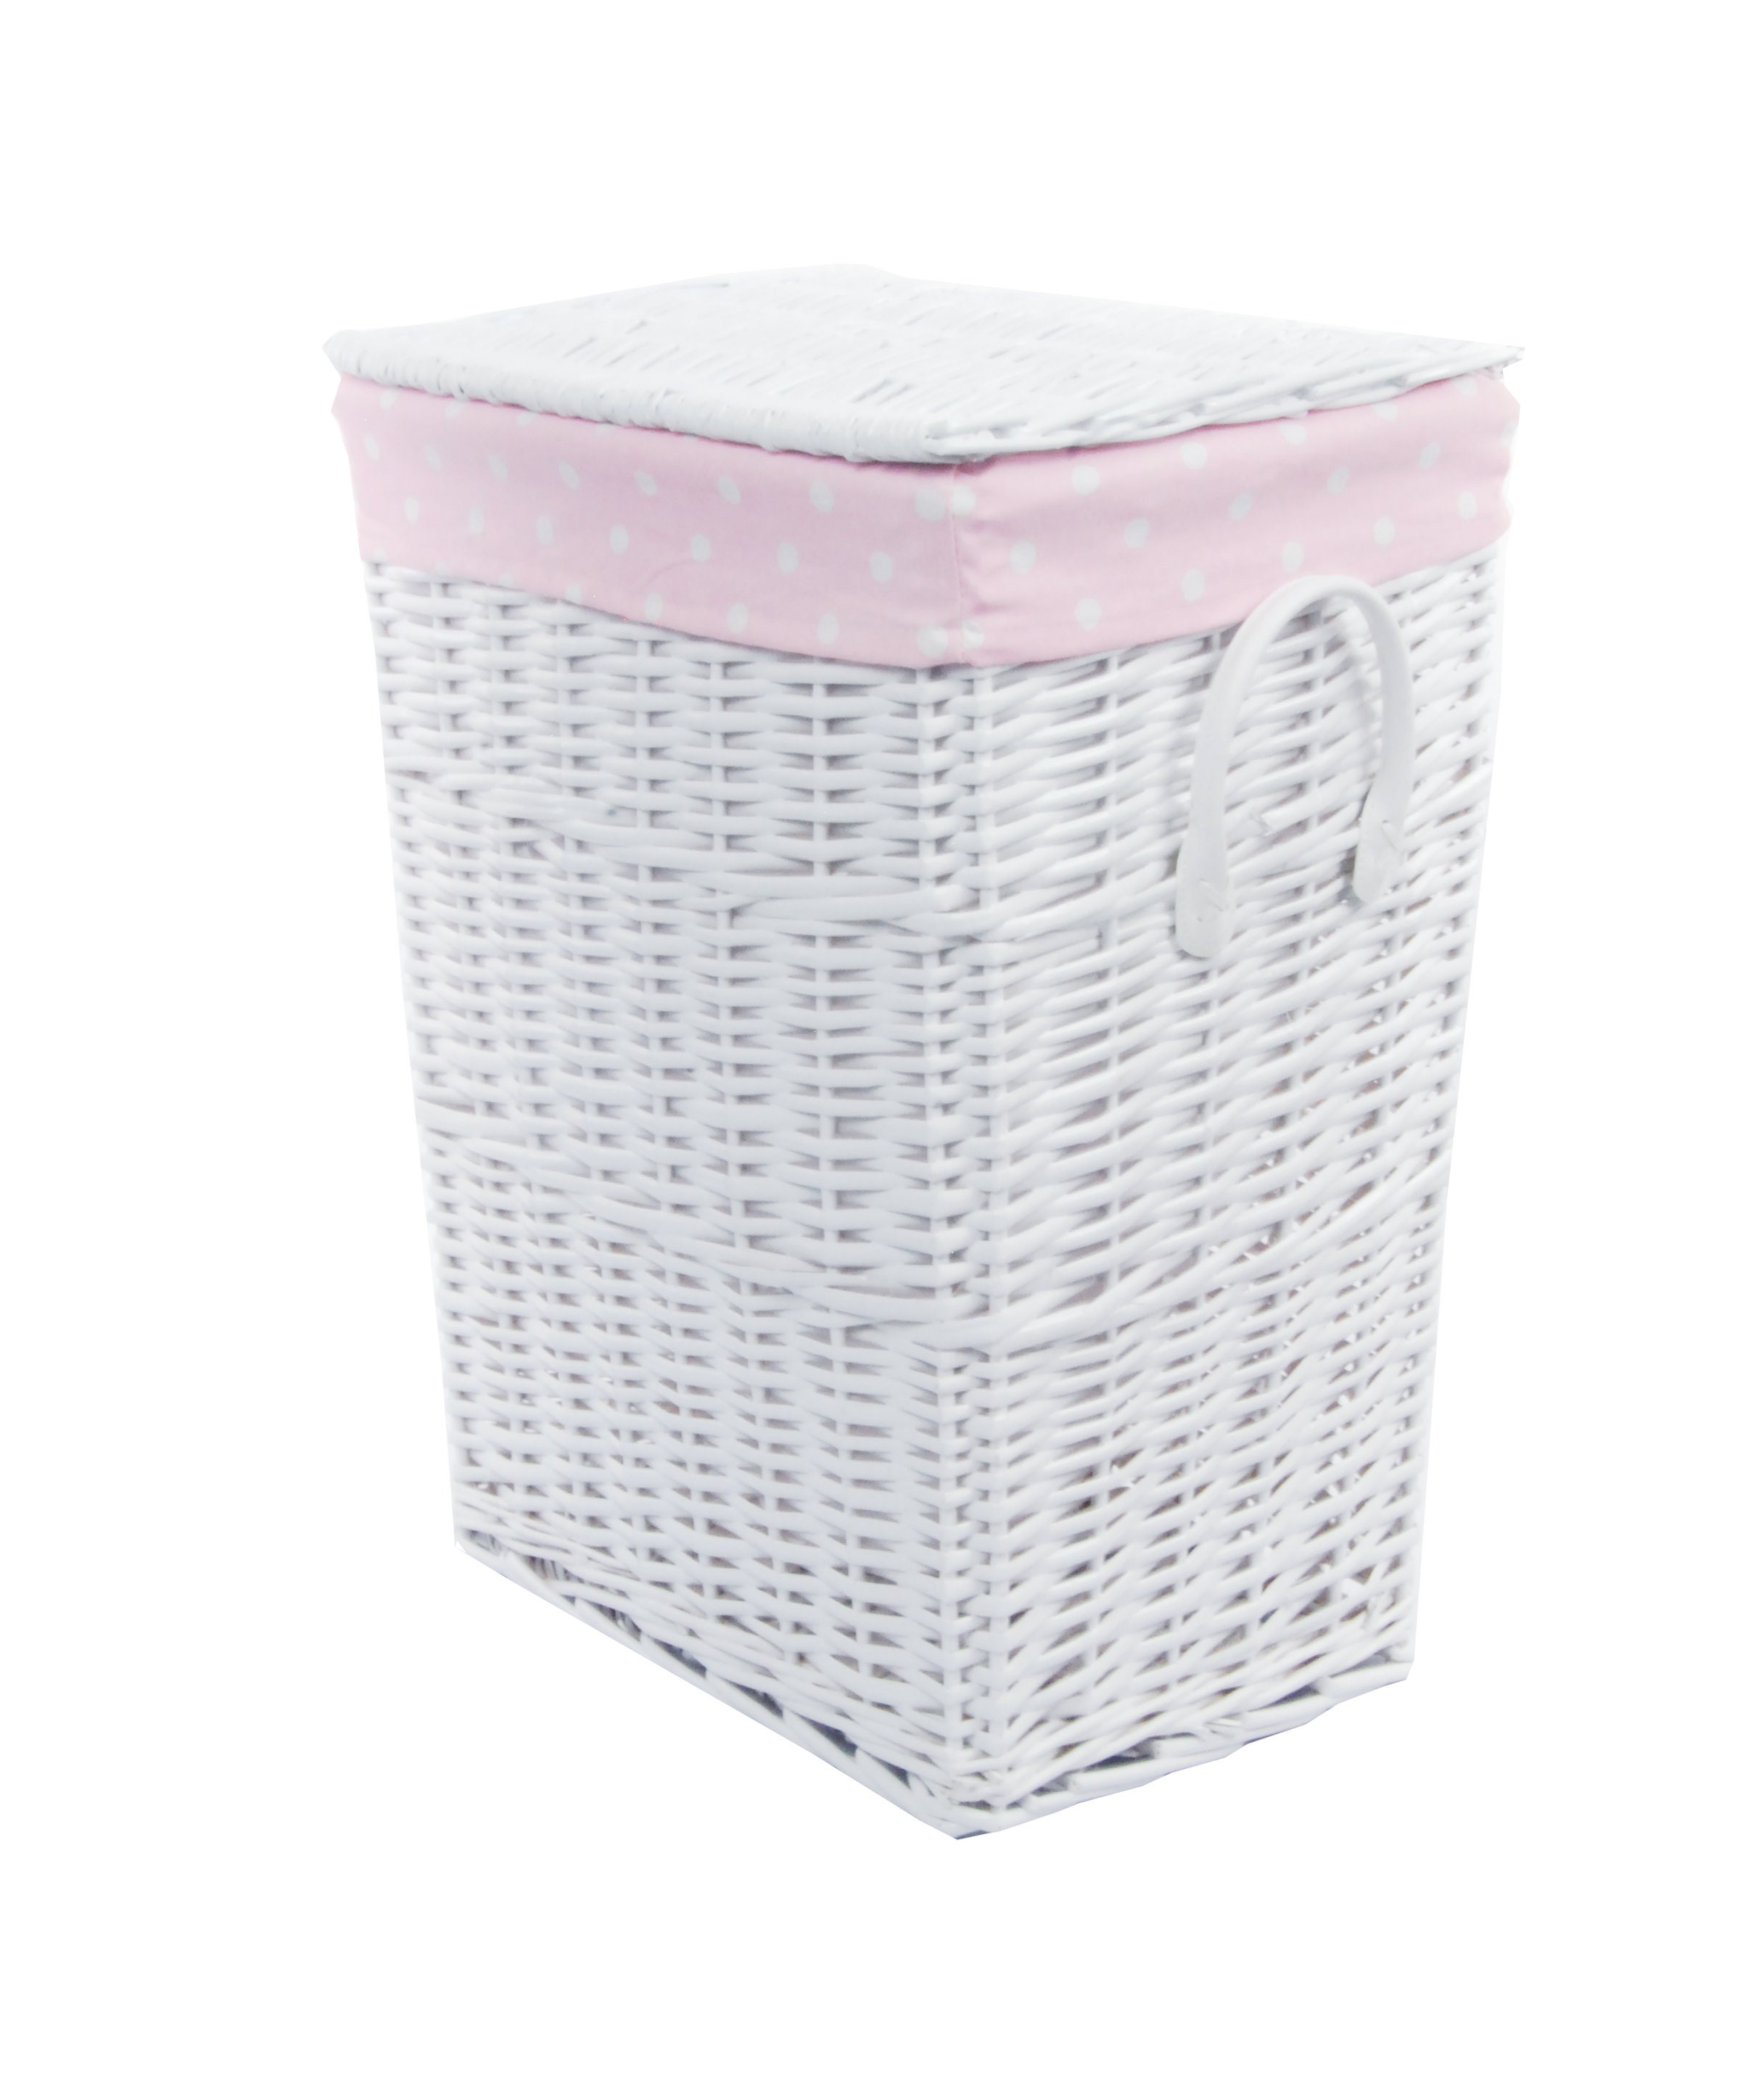 Laundry Basket Laundry Chest White Baby Pink/blue Willow With Laundry Bag  Lid Handles 32x24 H.48 -  Finland